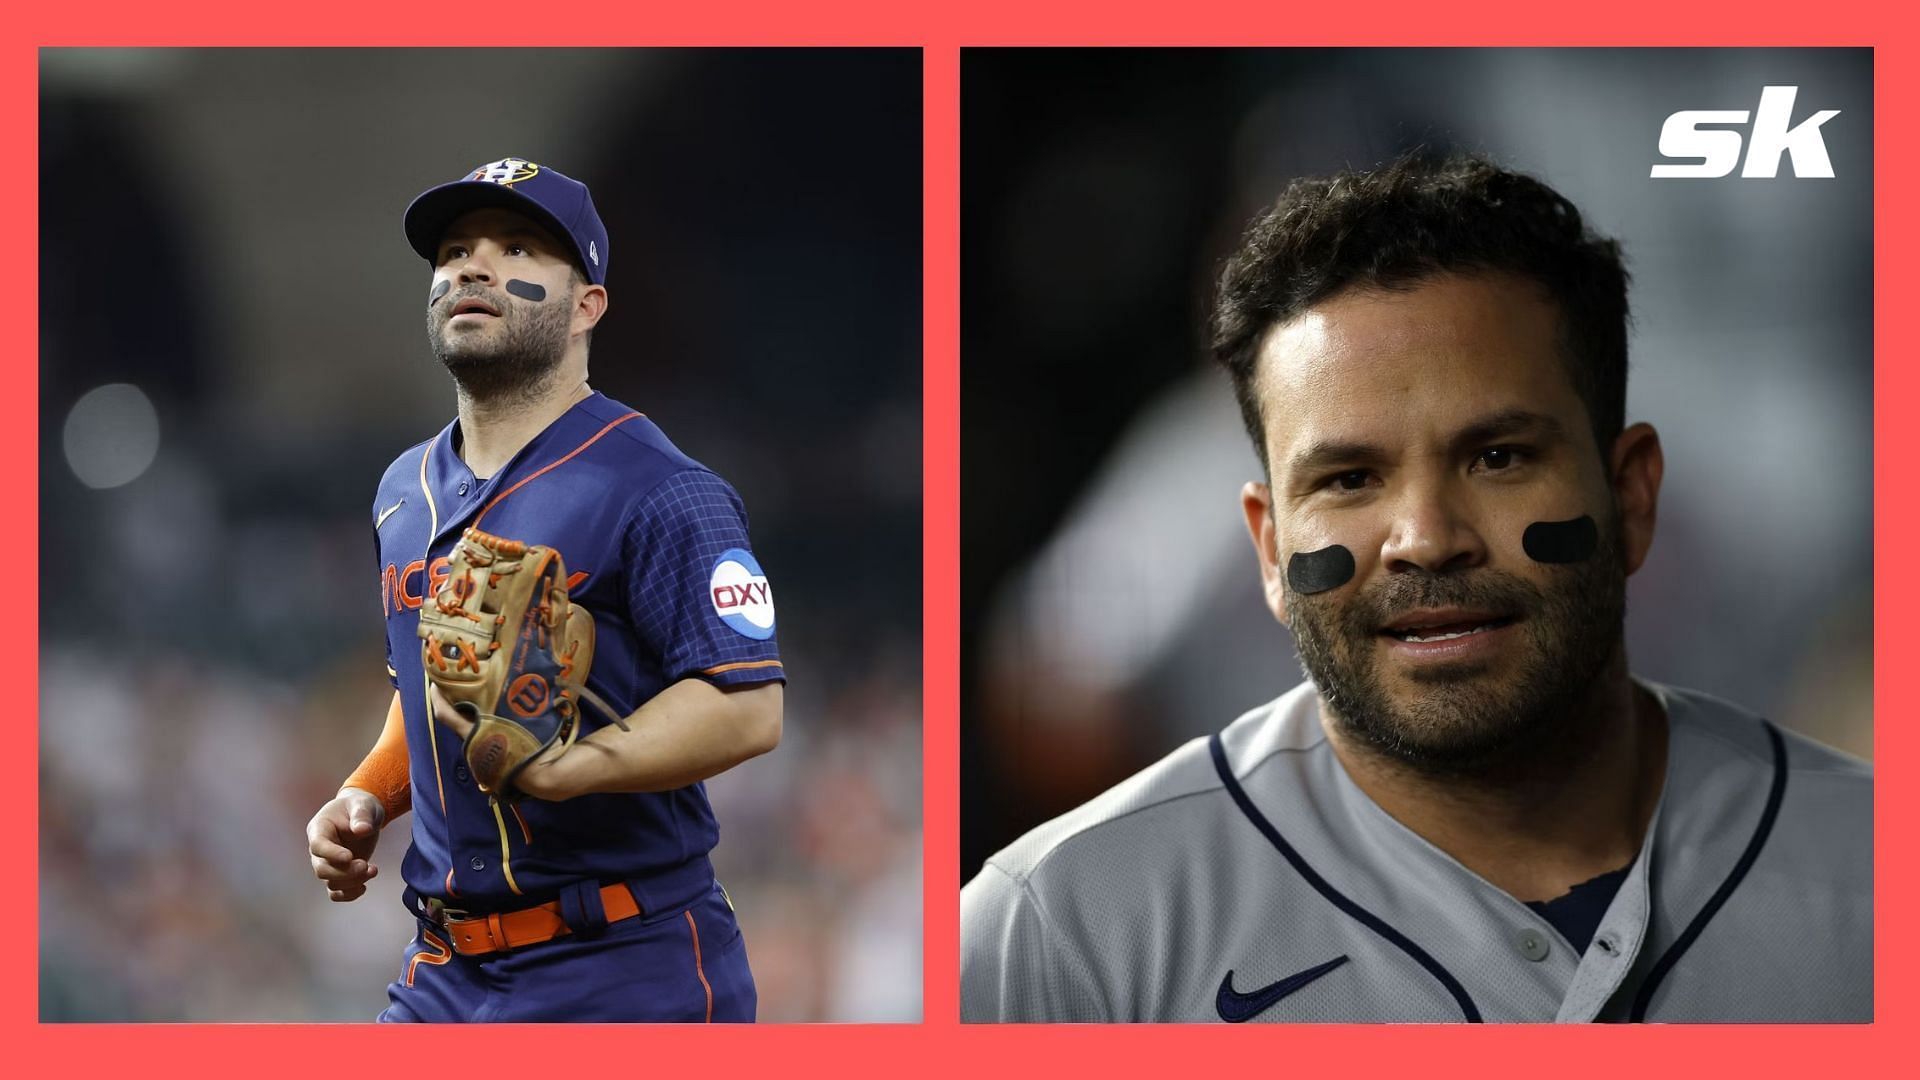 The Houston Astros have placed Jose Altuve on the 10-day IL with an oblique injury